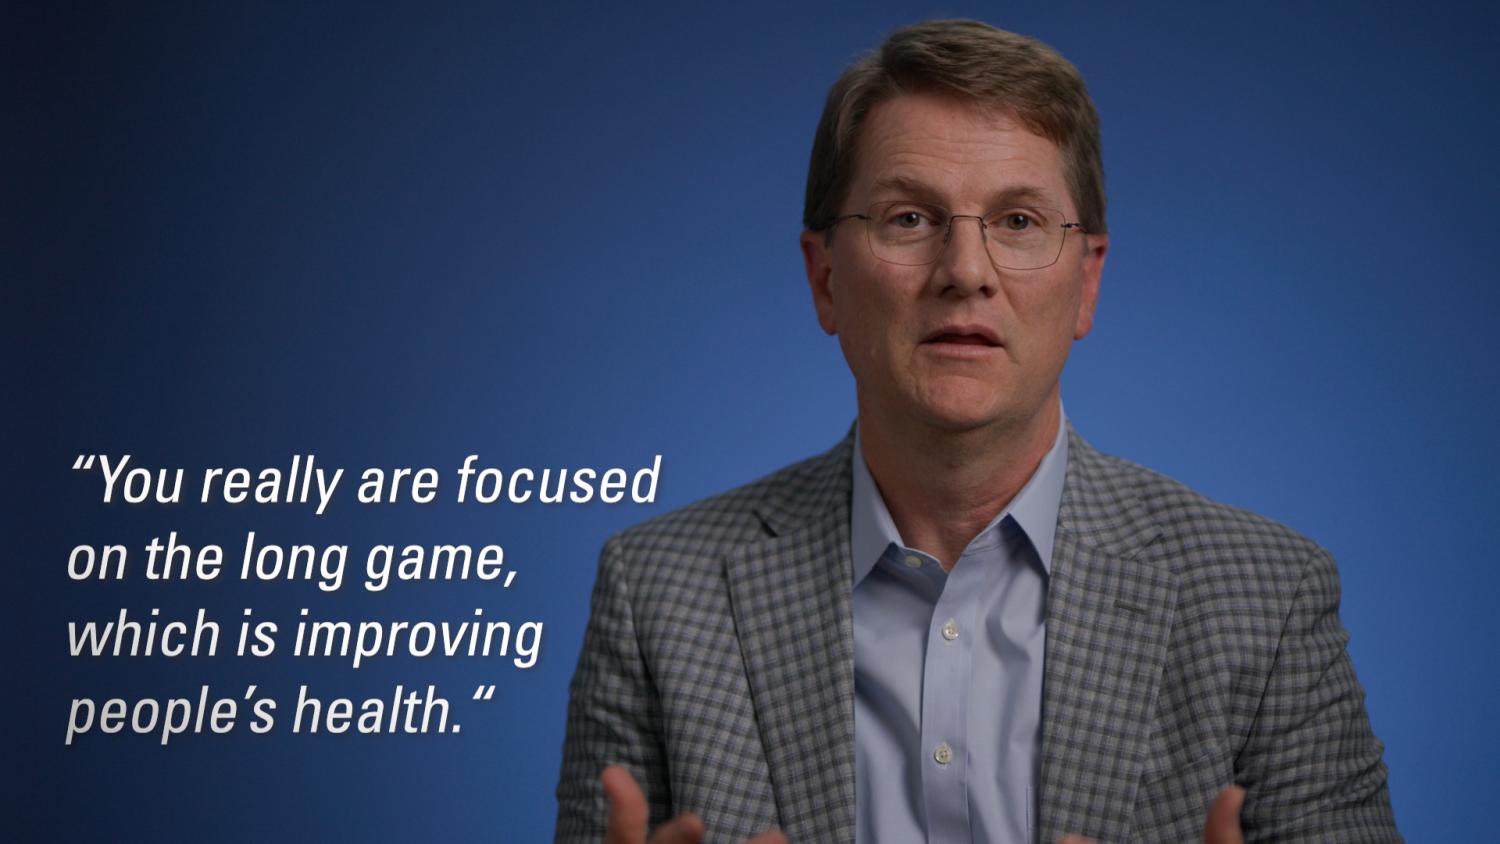 The Value of Health Systems: Timothy Pehrson